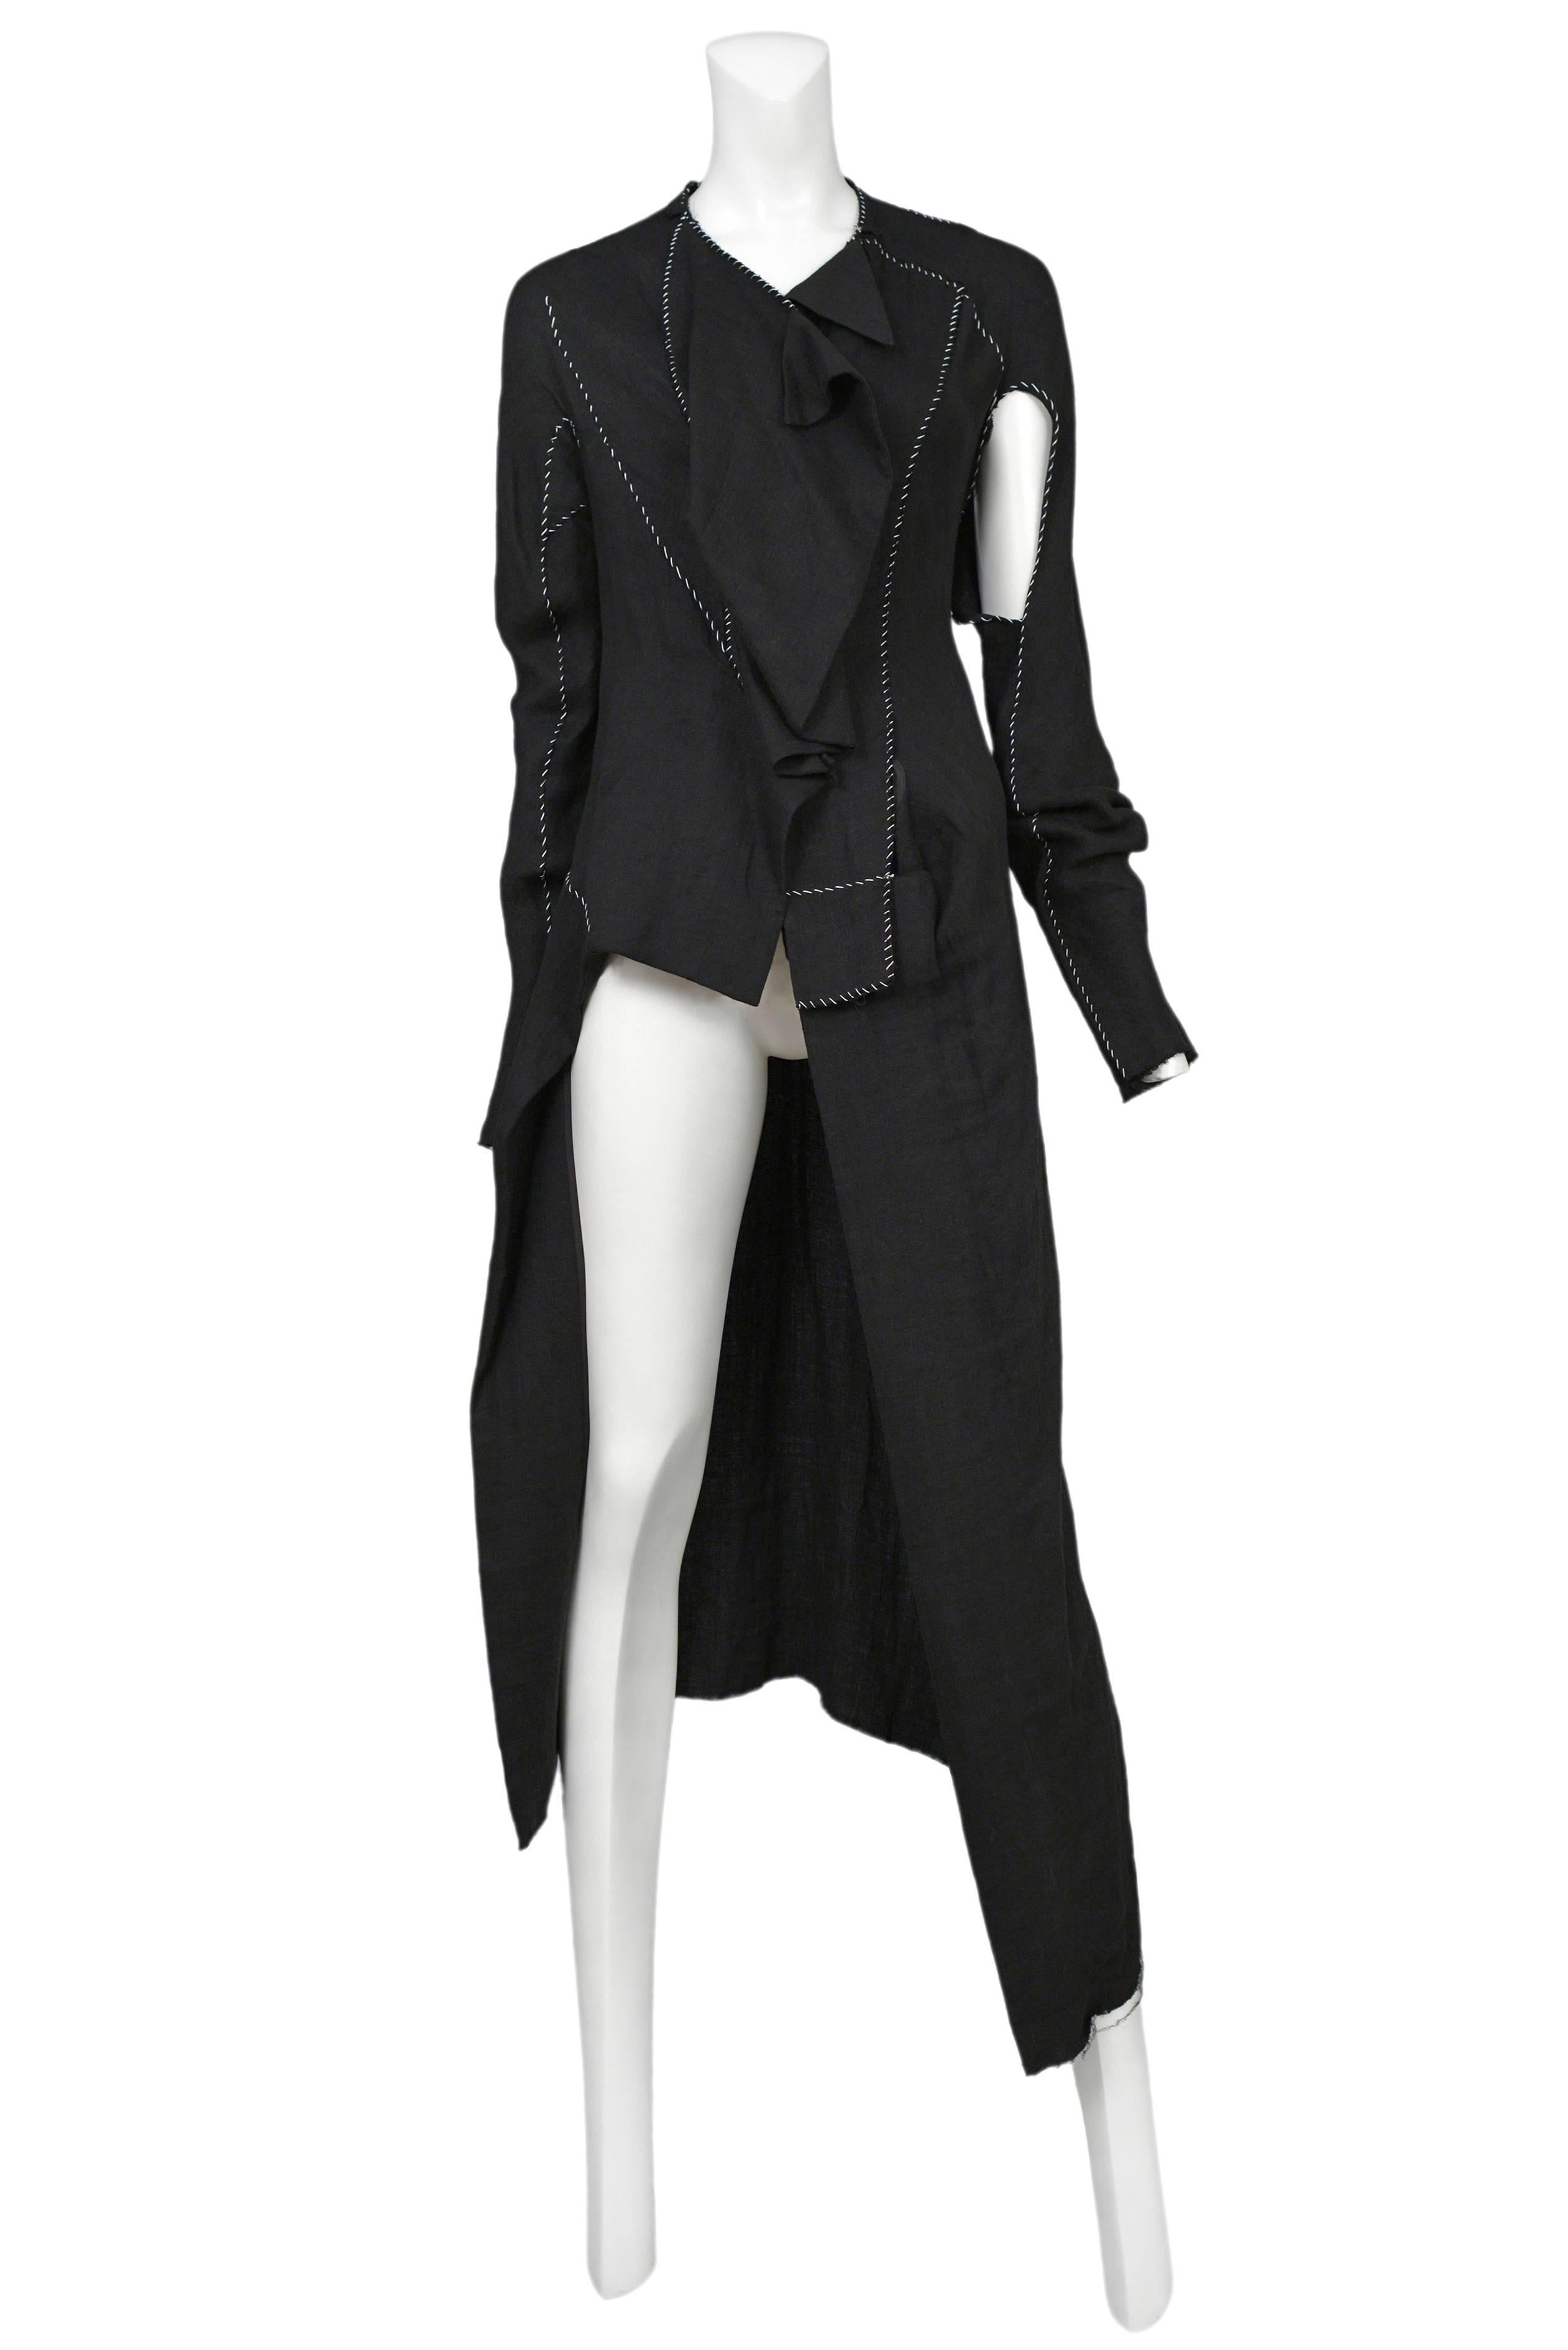 Vintage Yohji Yamamoto black coat featuring abstract cutouts and white raw stitch work throughout.
Please inquire for additional images.